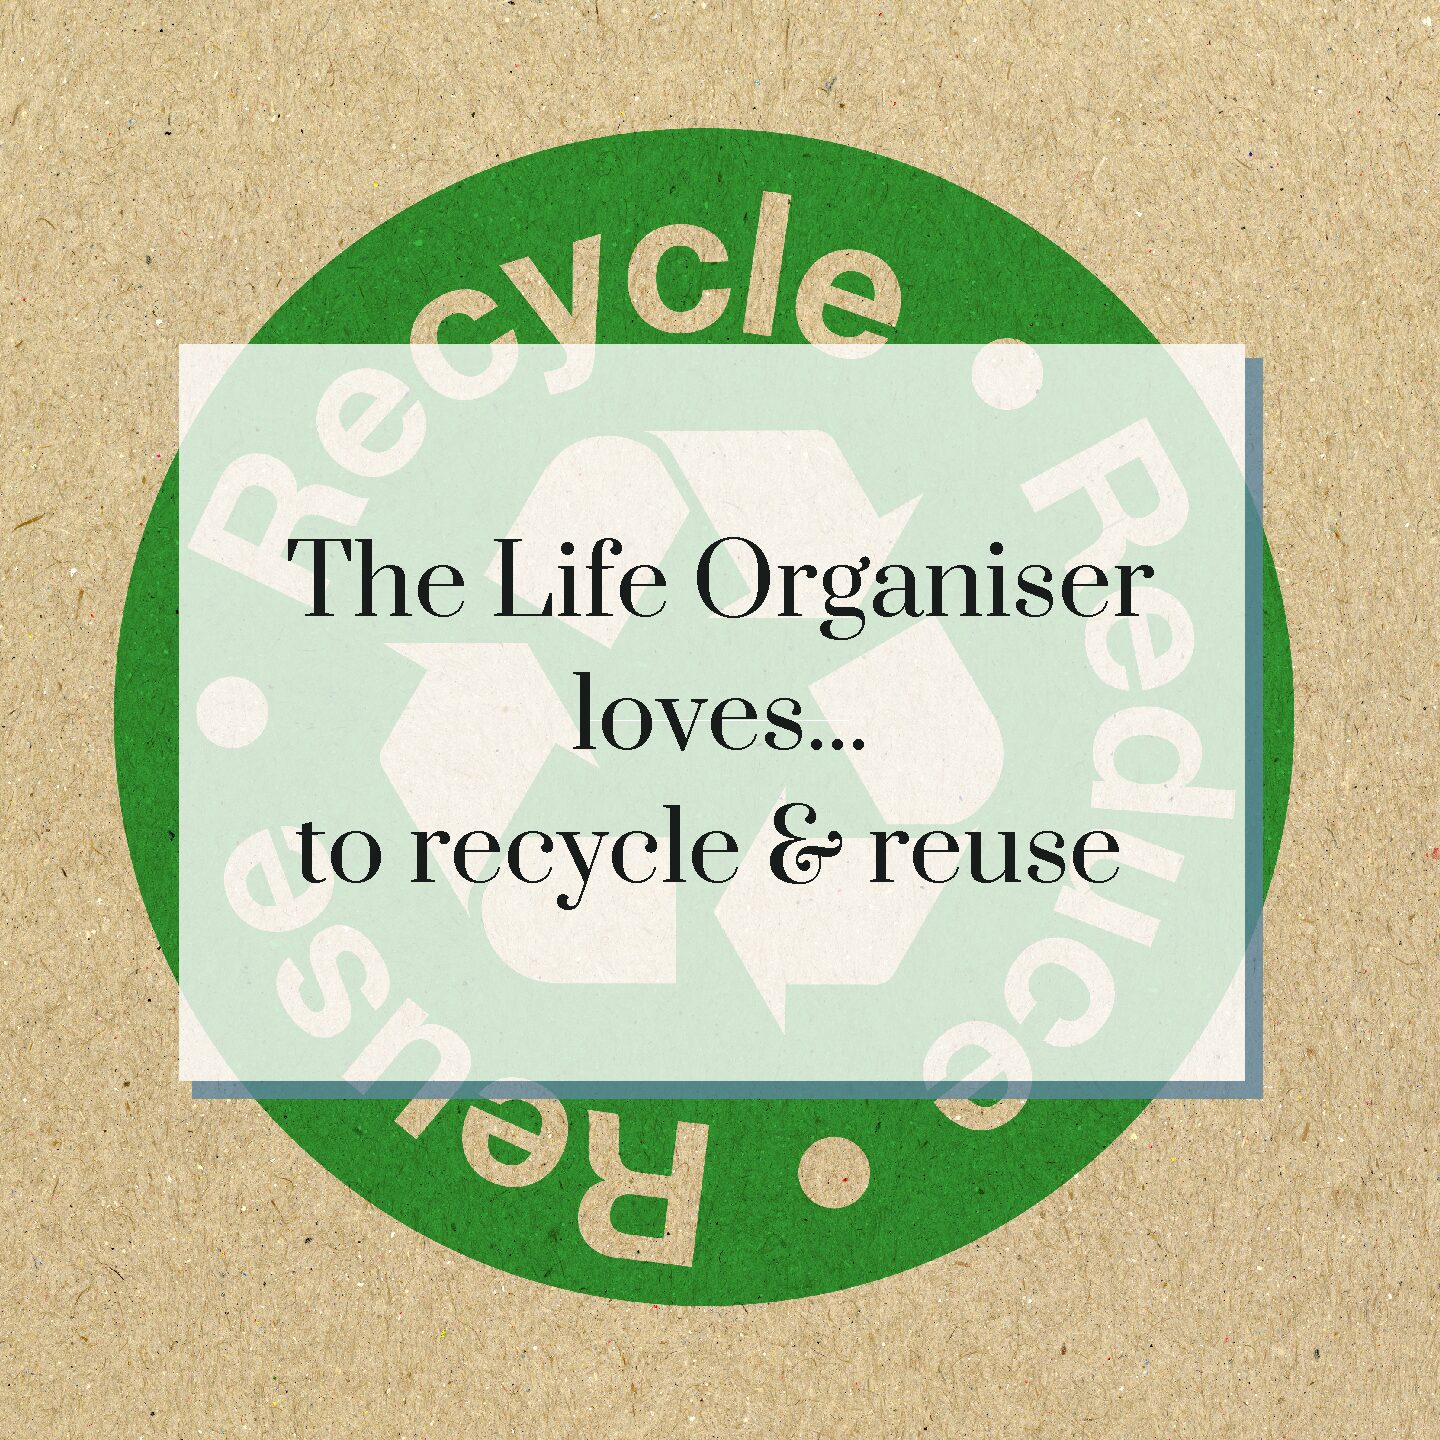 The Life Organiser…loves to recycle & reuse!